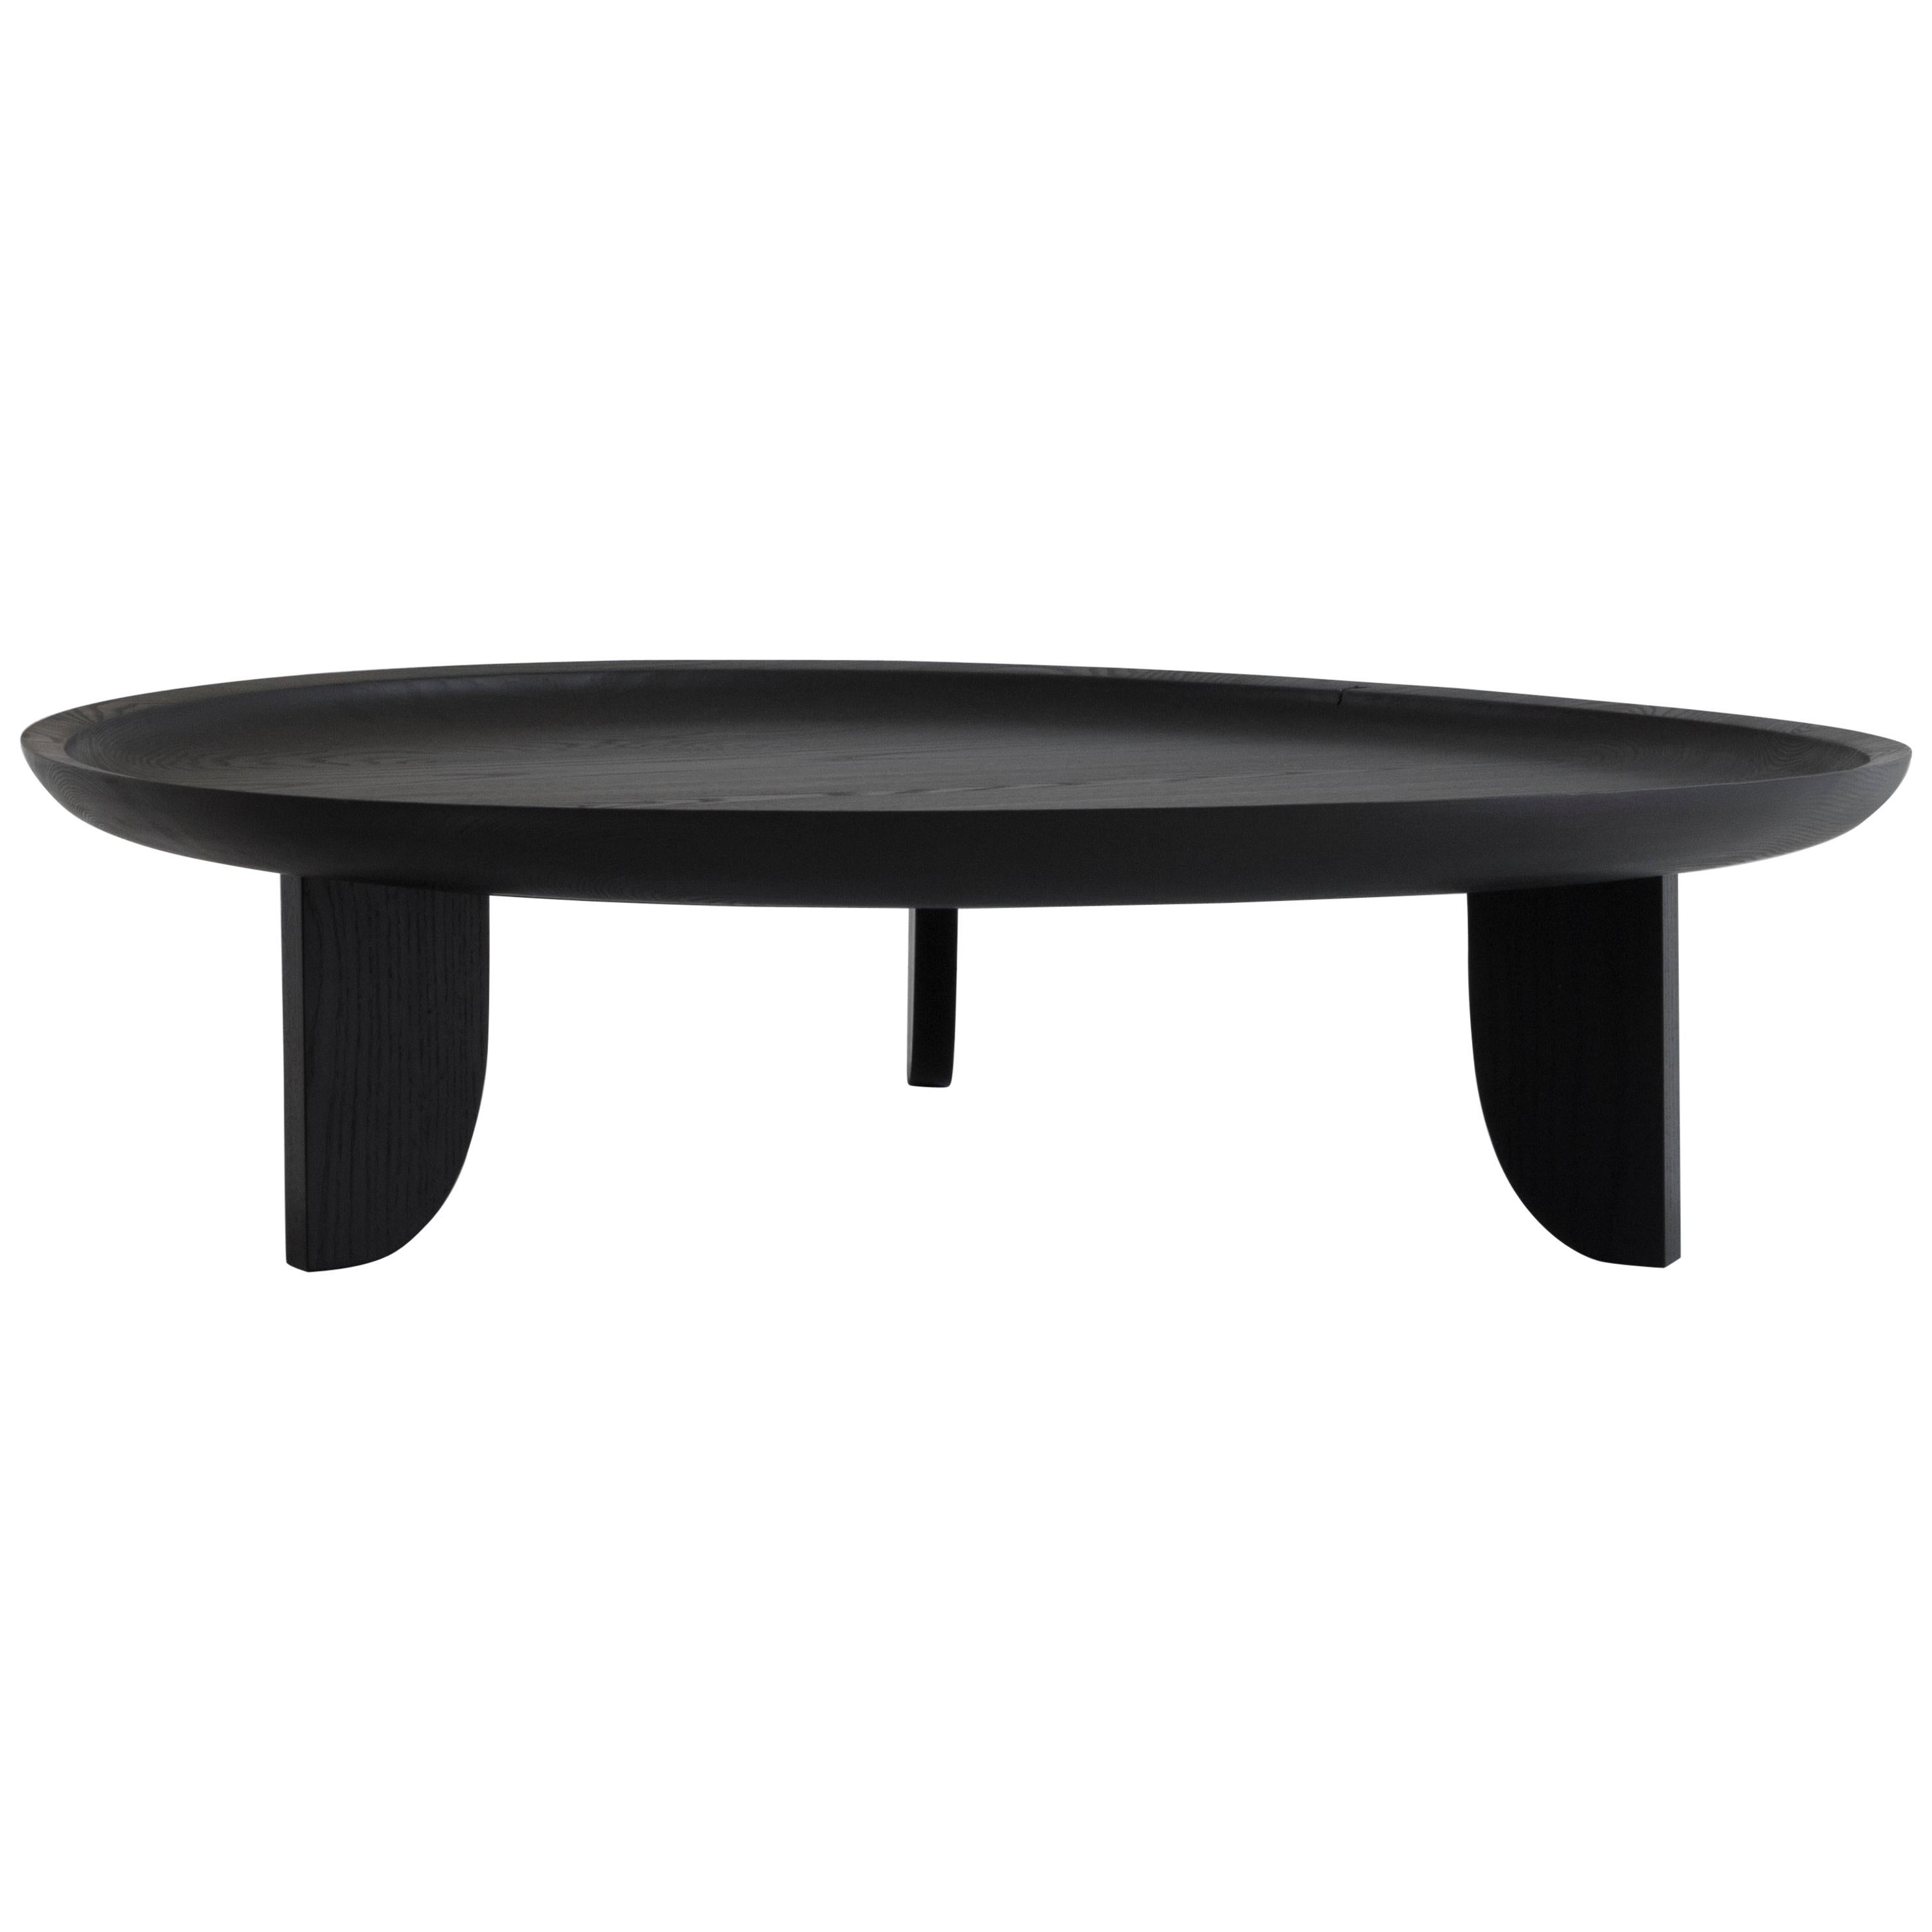 Dish Solid Wood Contemporary Sculptural Carved Coffee Table Extra Large Black